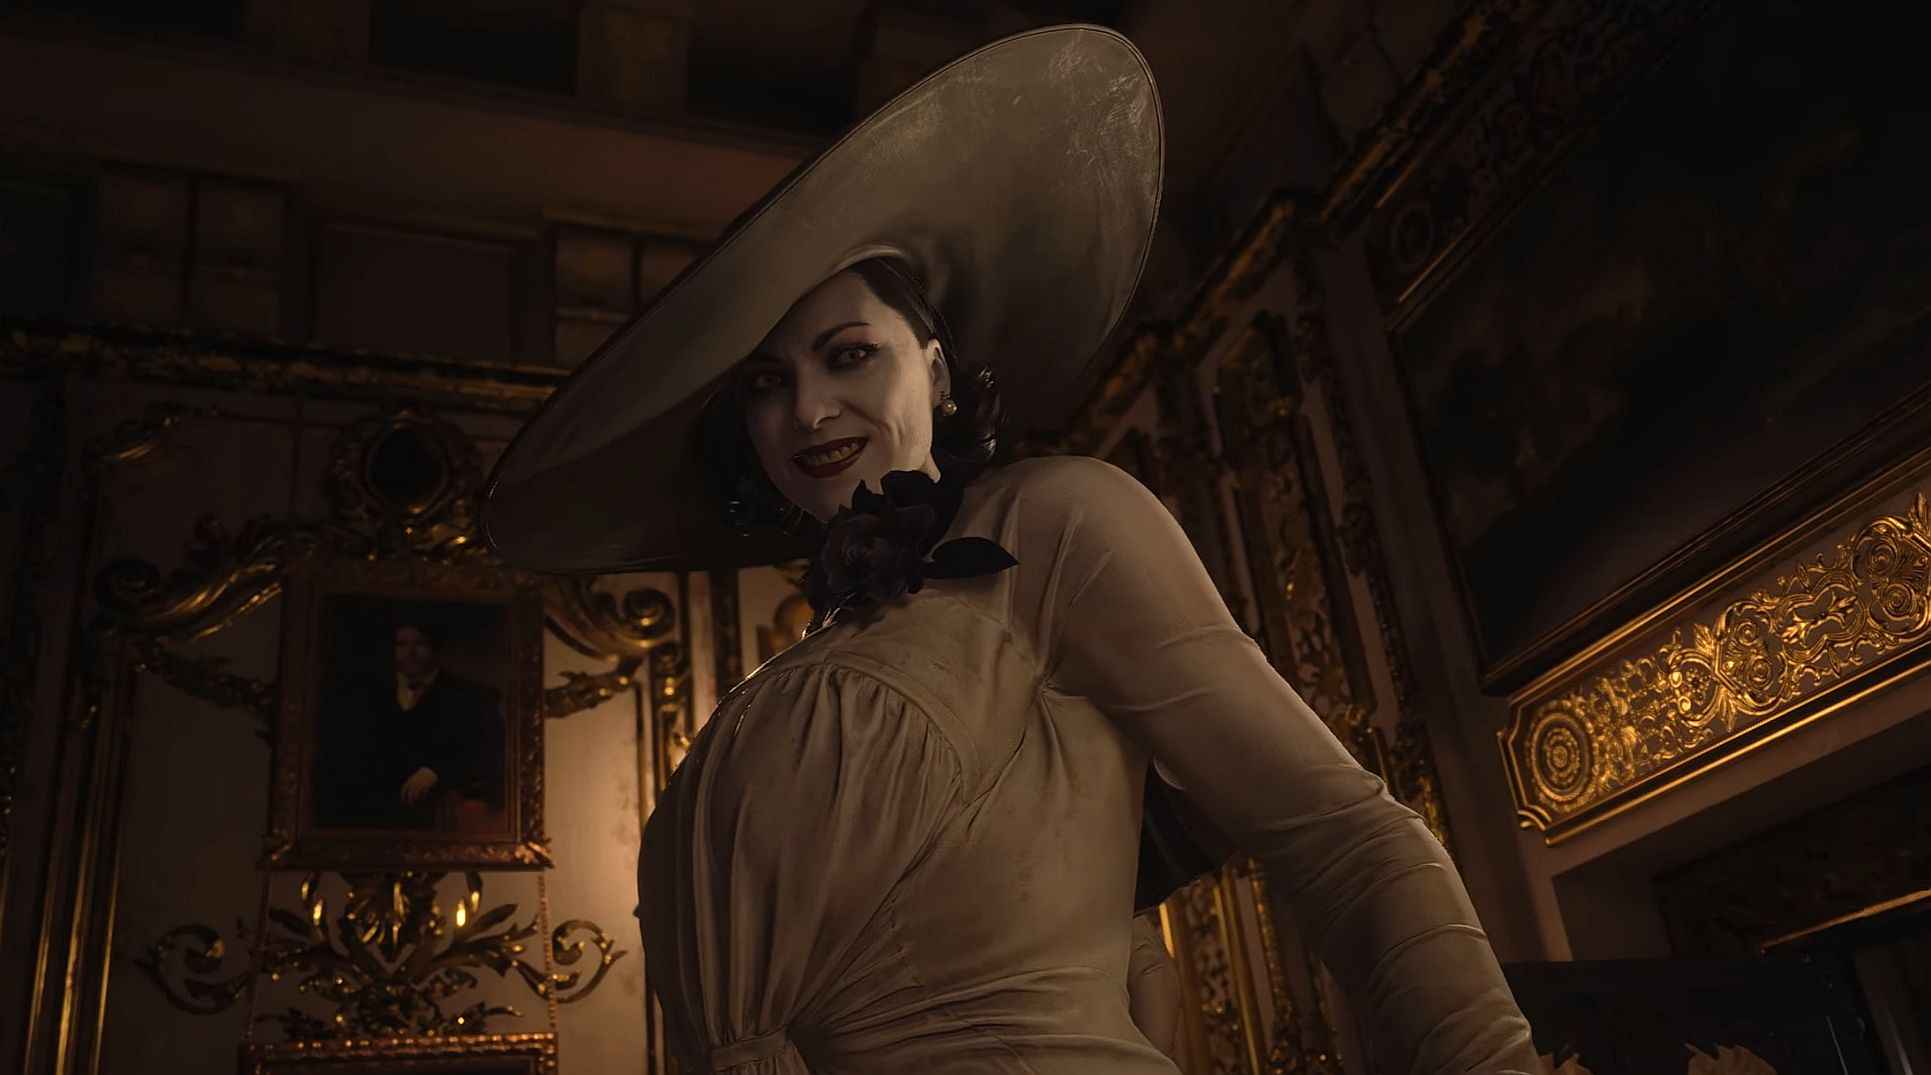 Image for Resident Evil Village: The Mercenaries trailer shows off a playable Lady Dimitrescu